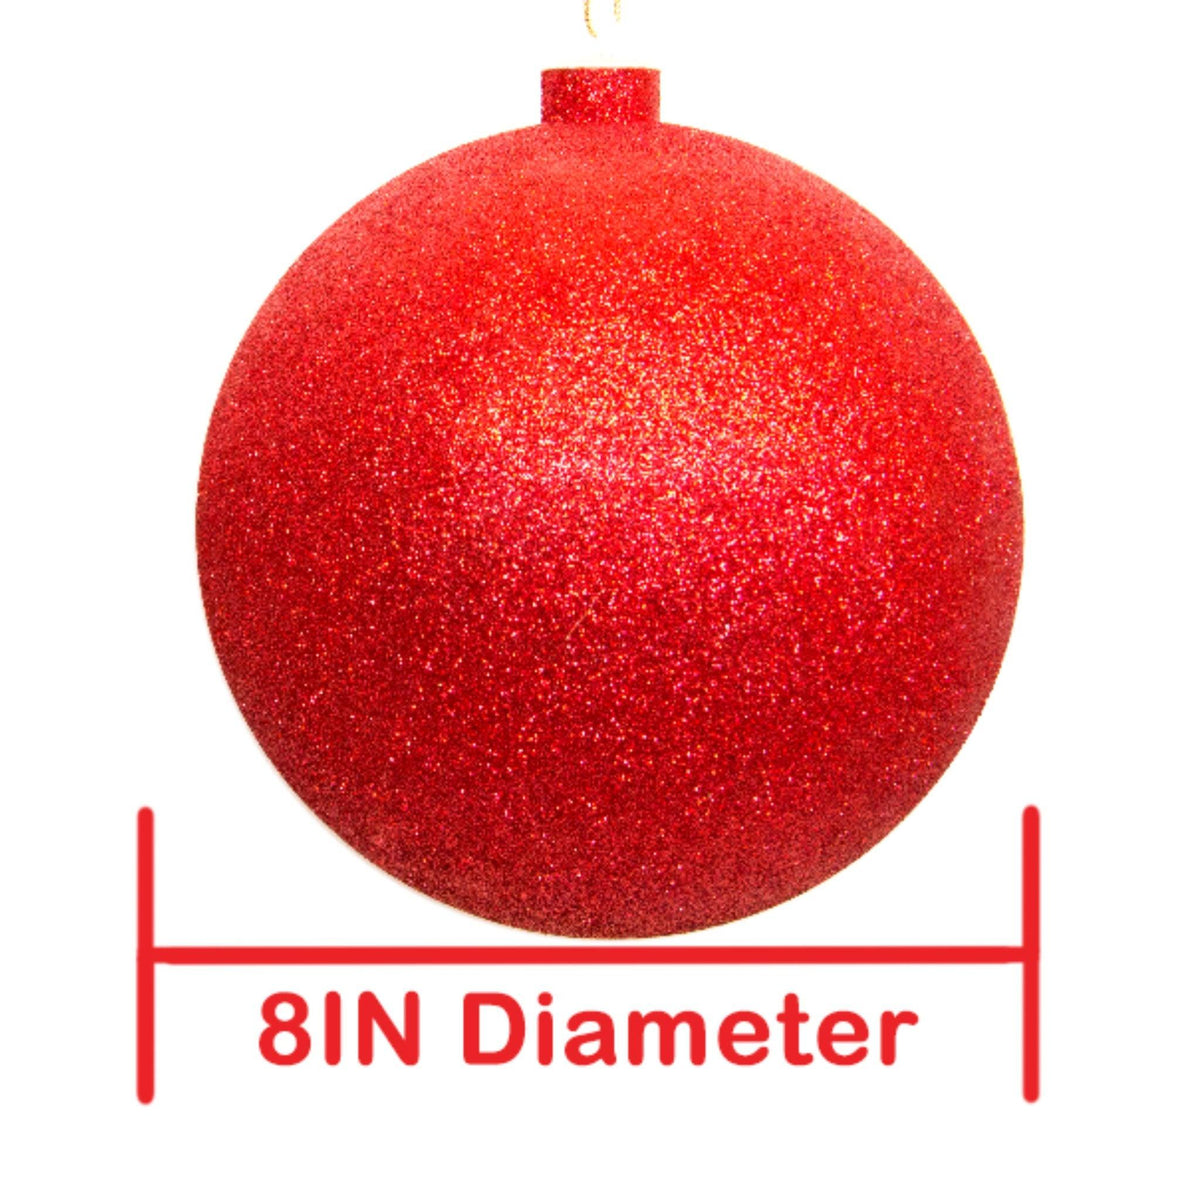 Lee Display offers brand new Shiny Glitter Red Plastic Ball Ornaments at wholesale prices for affordable Christmas Tree Hanging and Holiday Decorating on sale at leedisplay.com